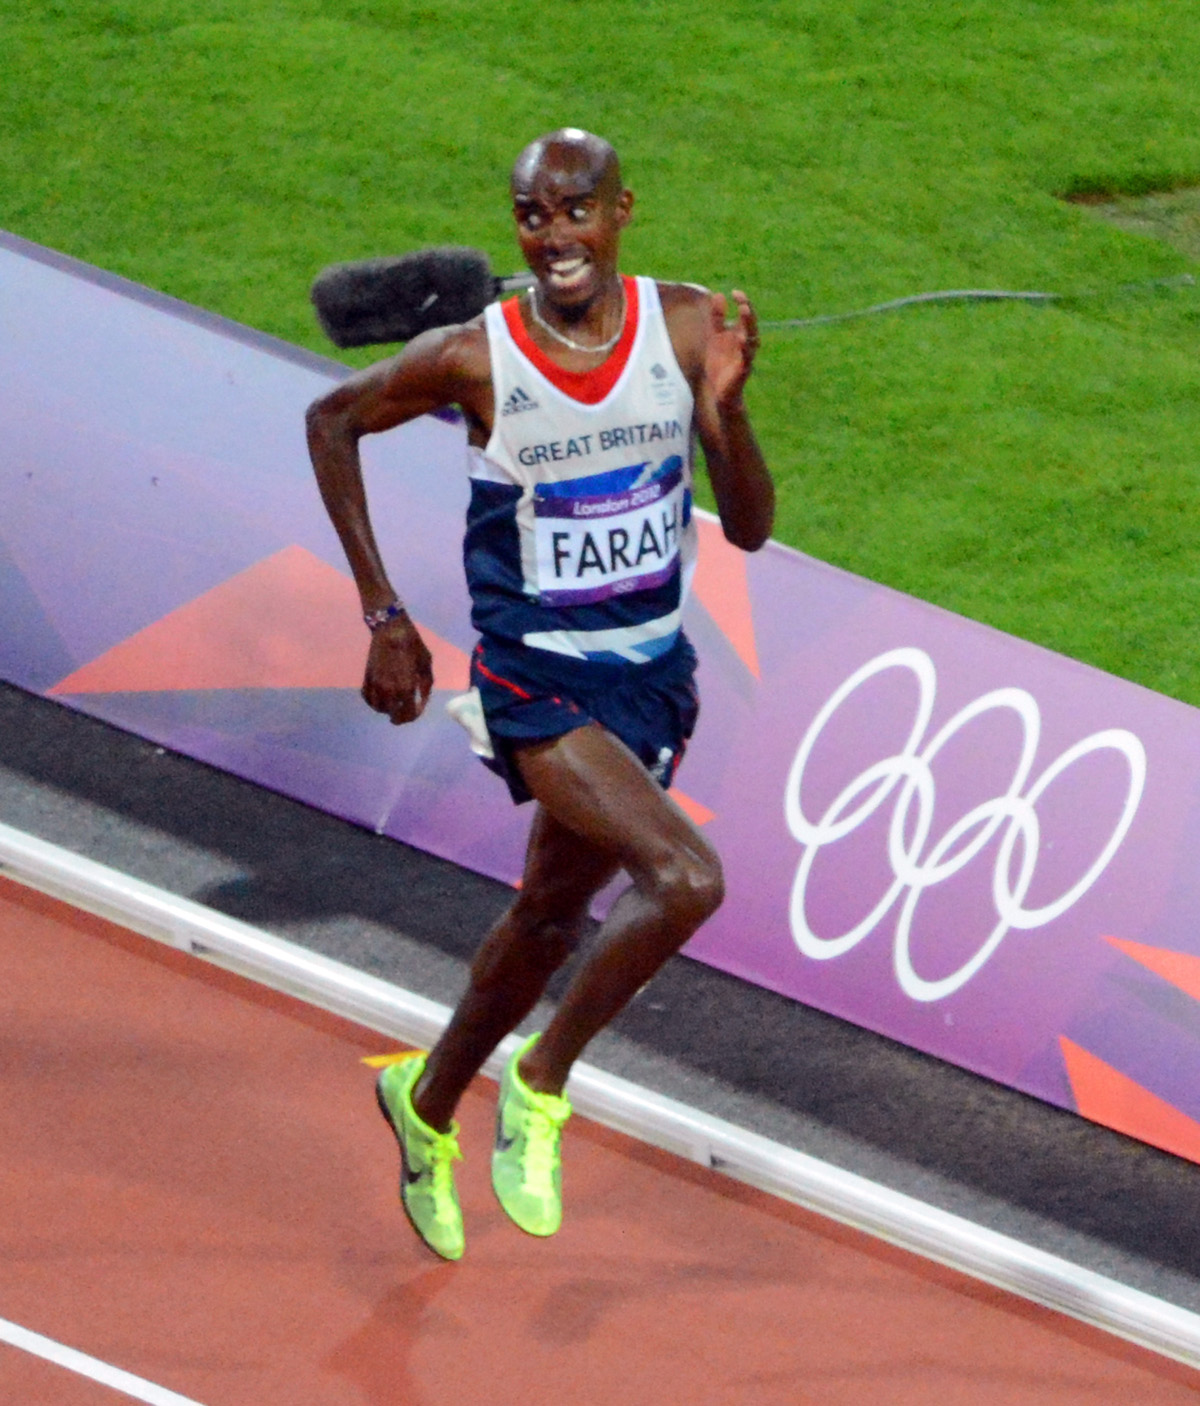 Great Briain runner, Mo Farah, wins the 10,000 meter gold medal in the London Olympics. Galen Rupp, from the USA won the Silver Medal.(AP Photo/Dick Druckman)